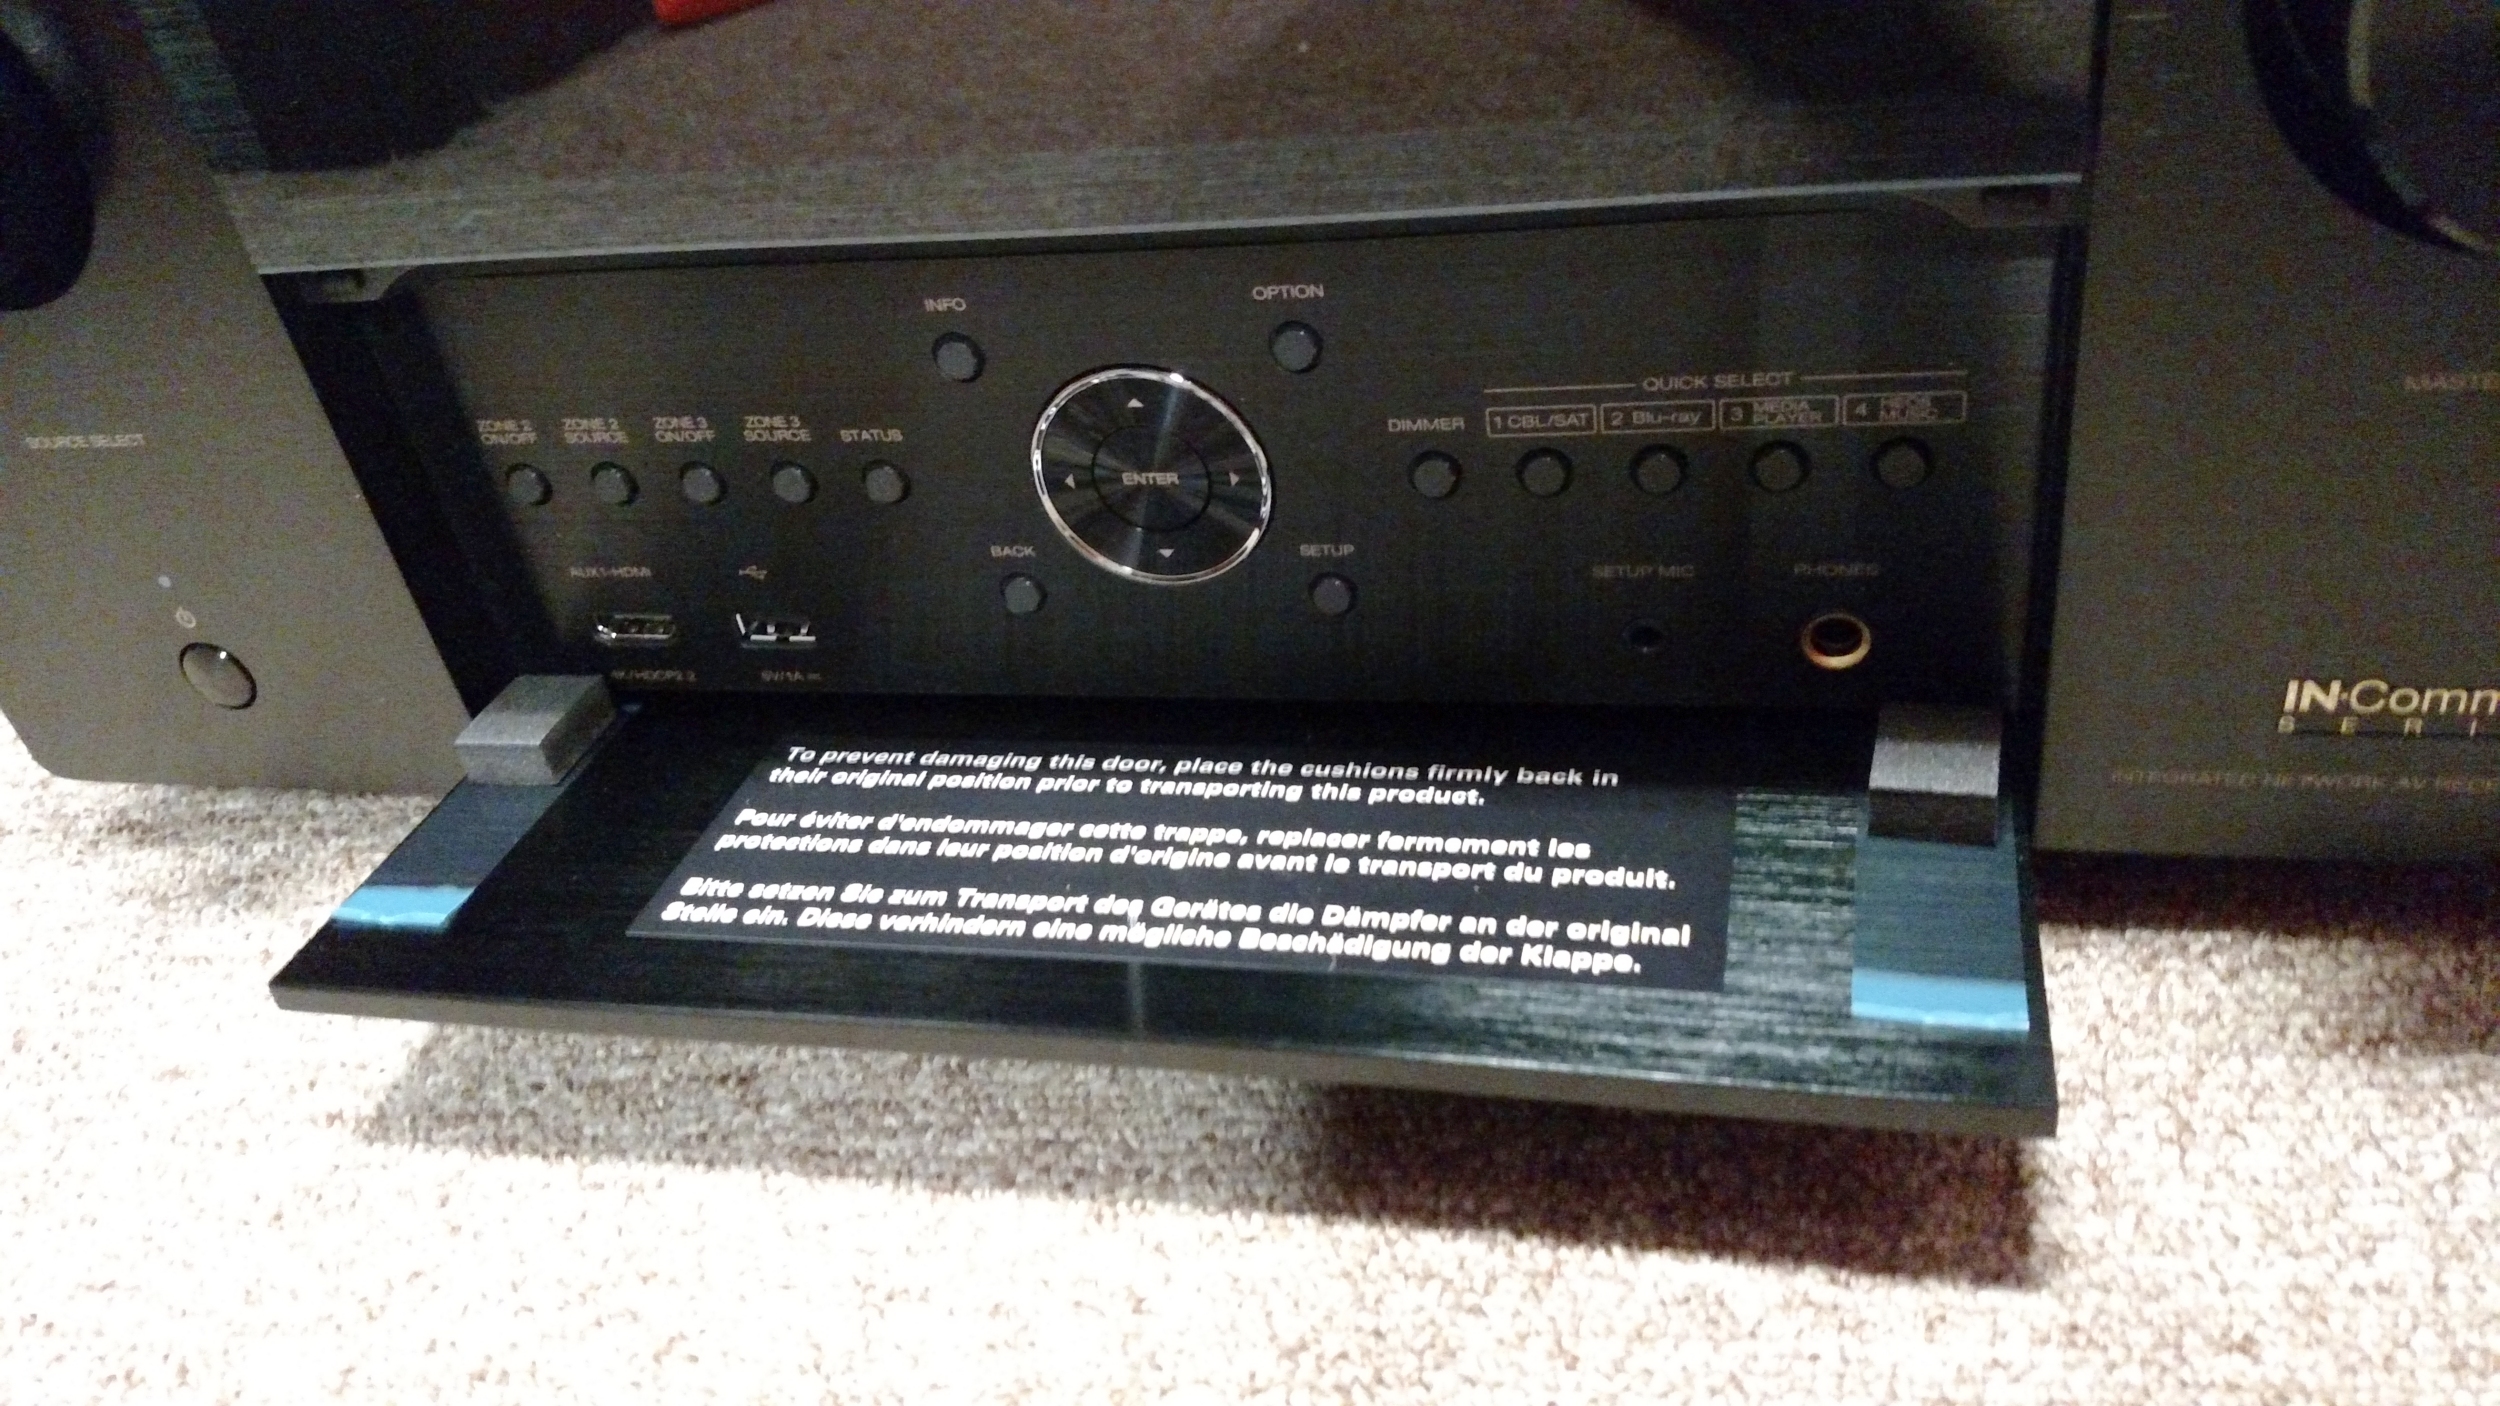 Denon AVR-X8500H front panel opened